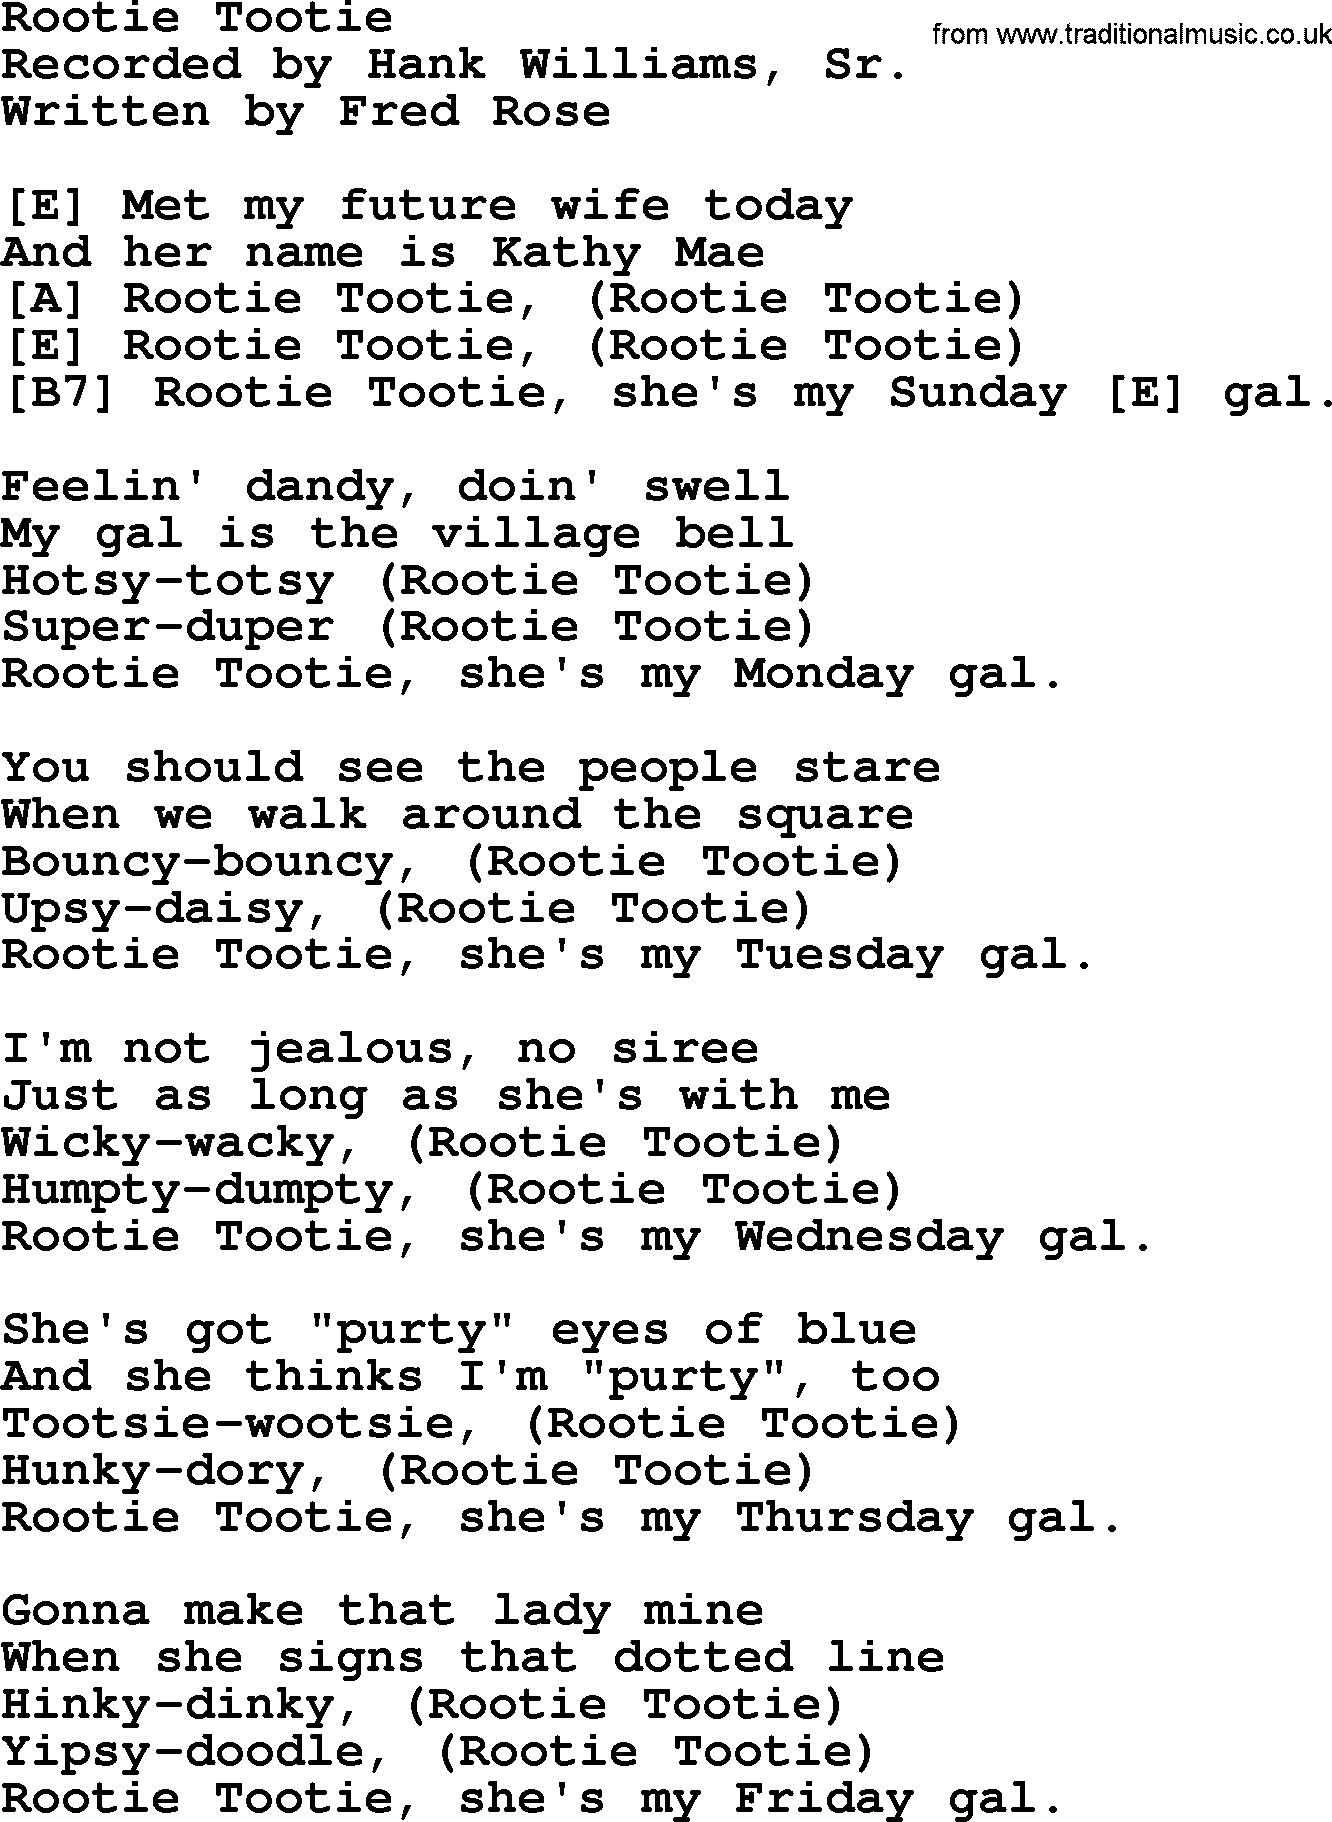 Hank Williams song Rootie Tootie, lyrics and chords